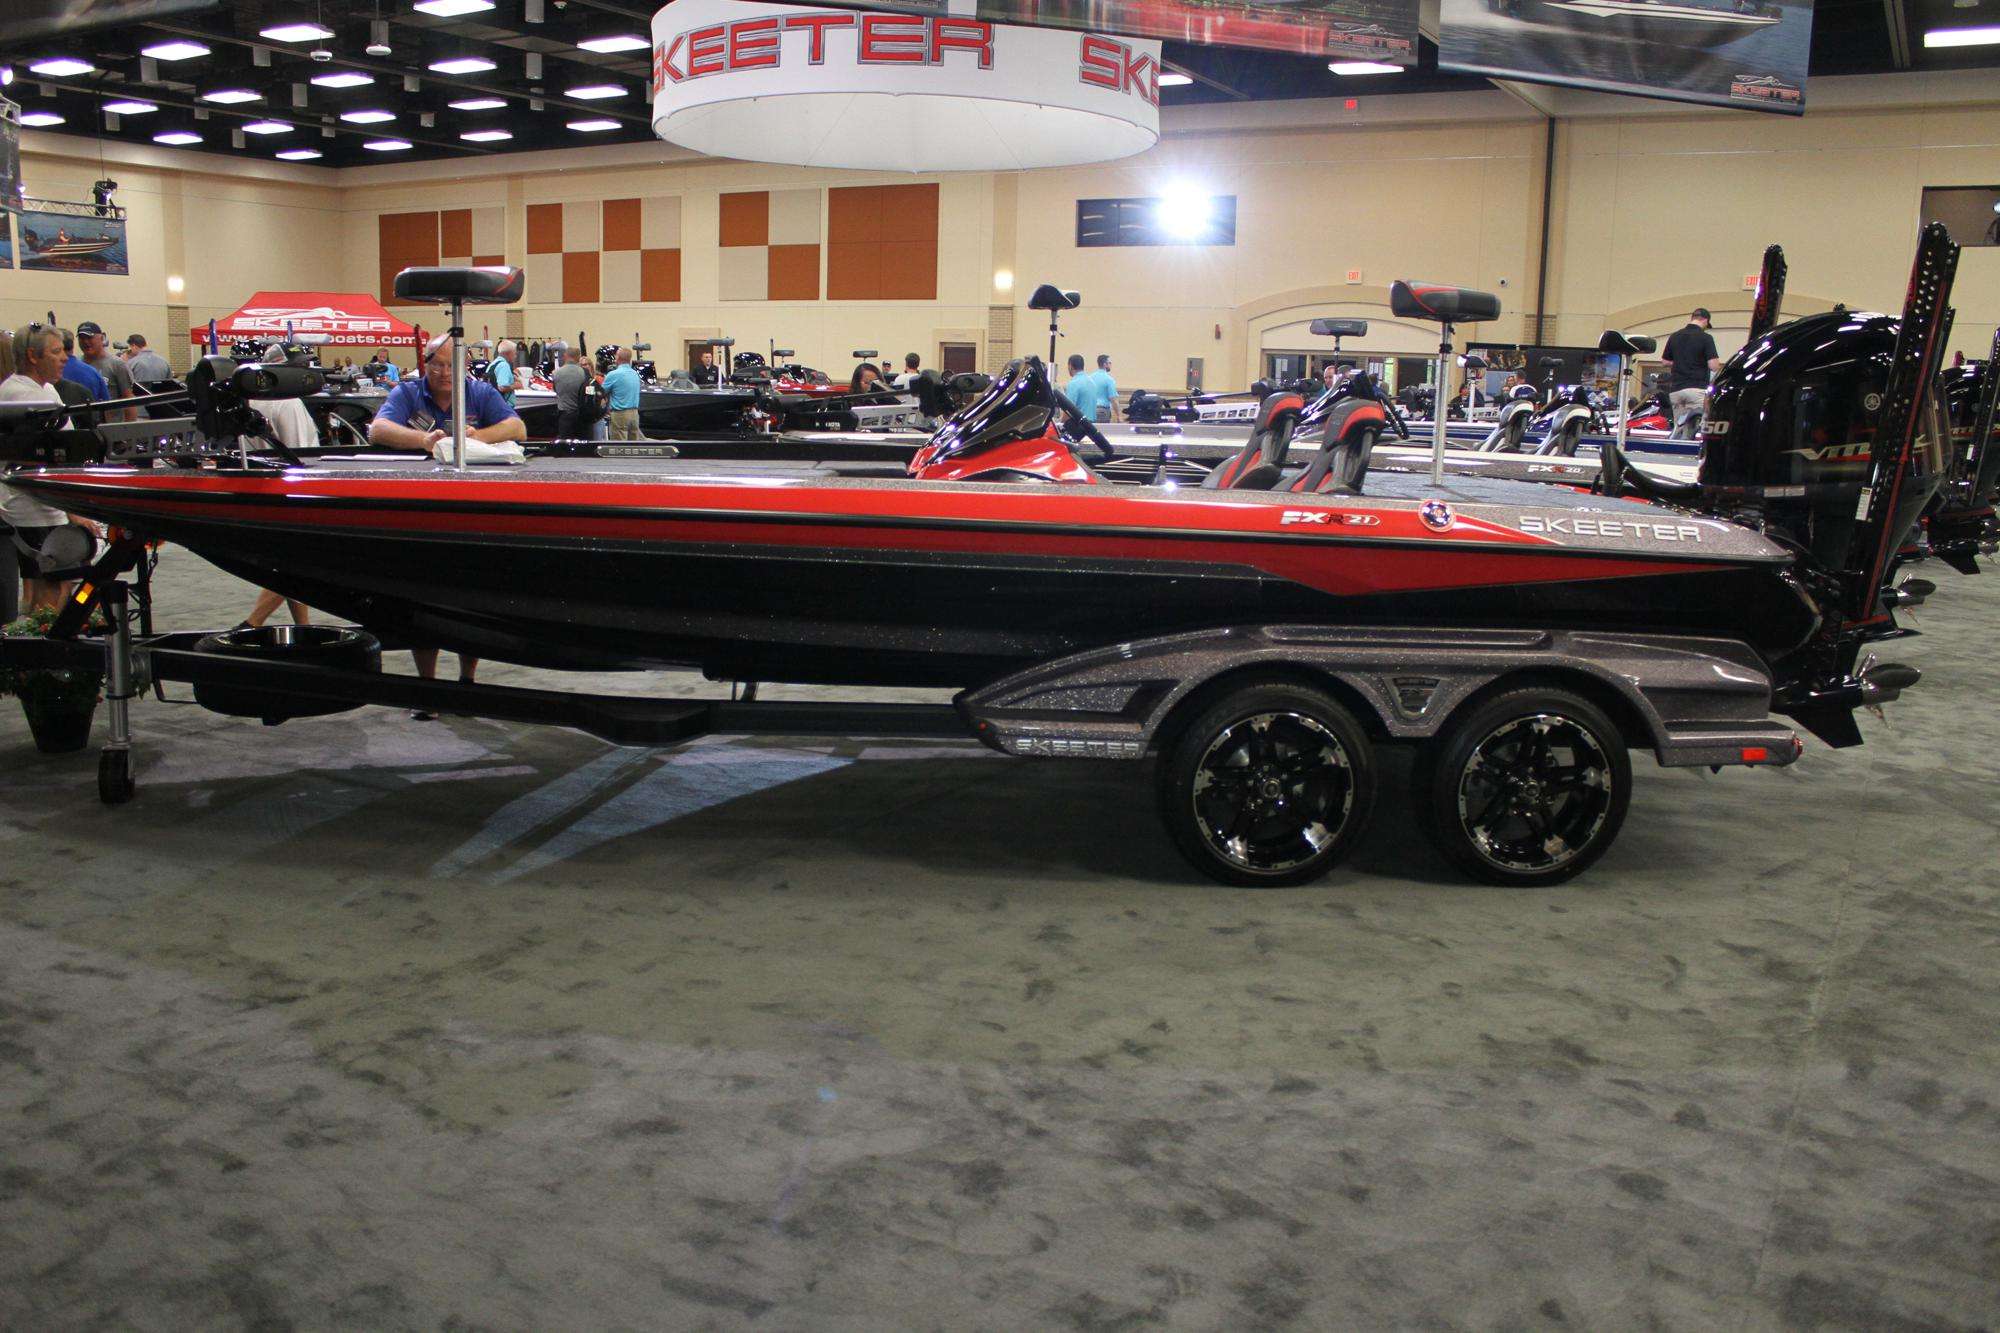 Skeeter Boats introduced their new FXR lineup of bass boats at their 2020 Southeastern Dealer Meeting in Longview, Tex. July 15 to 17, 2019.  The new boat comes in two sizes; 20â4â and 21â4â models, all equipped with Yamaha 250 SHO motors and three trim levels.  </p>
The first is Limited, which features eight color schemes, and packaged with Humminbird / Minn Kota and dual Power Pole Blades.  Next is the Apex edition; which features the Humminbird / Minn Kota gear, four special color packages, a different custom wheelset and a T-H Marine Atlas hydraulic jackplate.  Finally, the FXR Select; which allows the customer to order their color options and features.